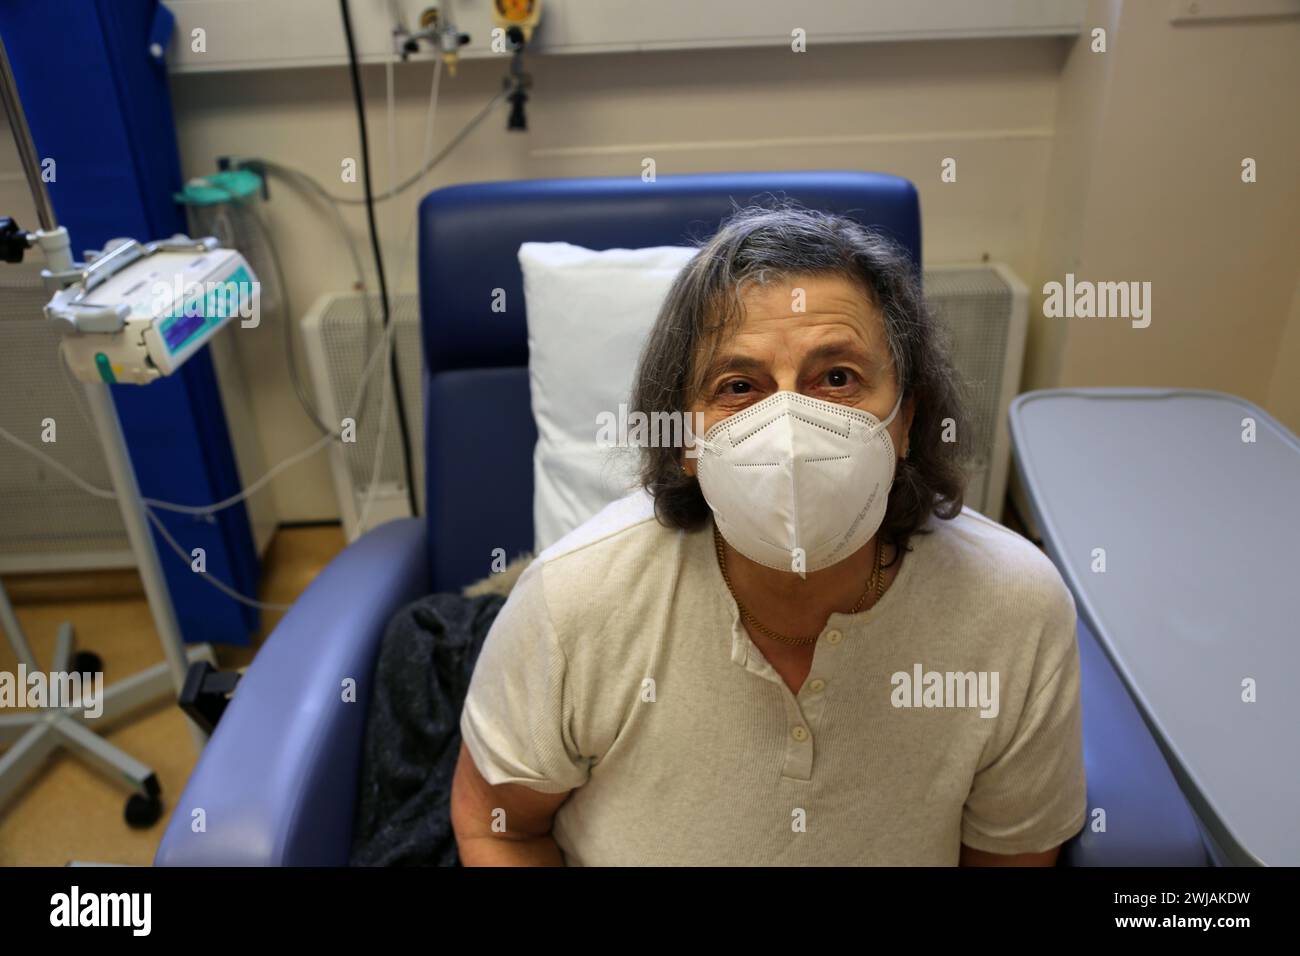 An Anaemic Patient wearing a Face Mask Waiting for an Iron Infusion at Hospital Surrey England Stock Photo